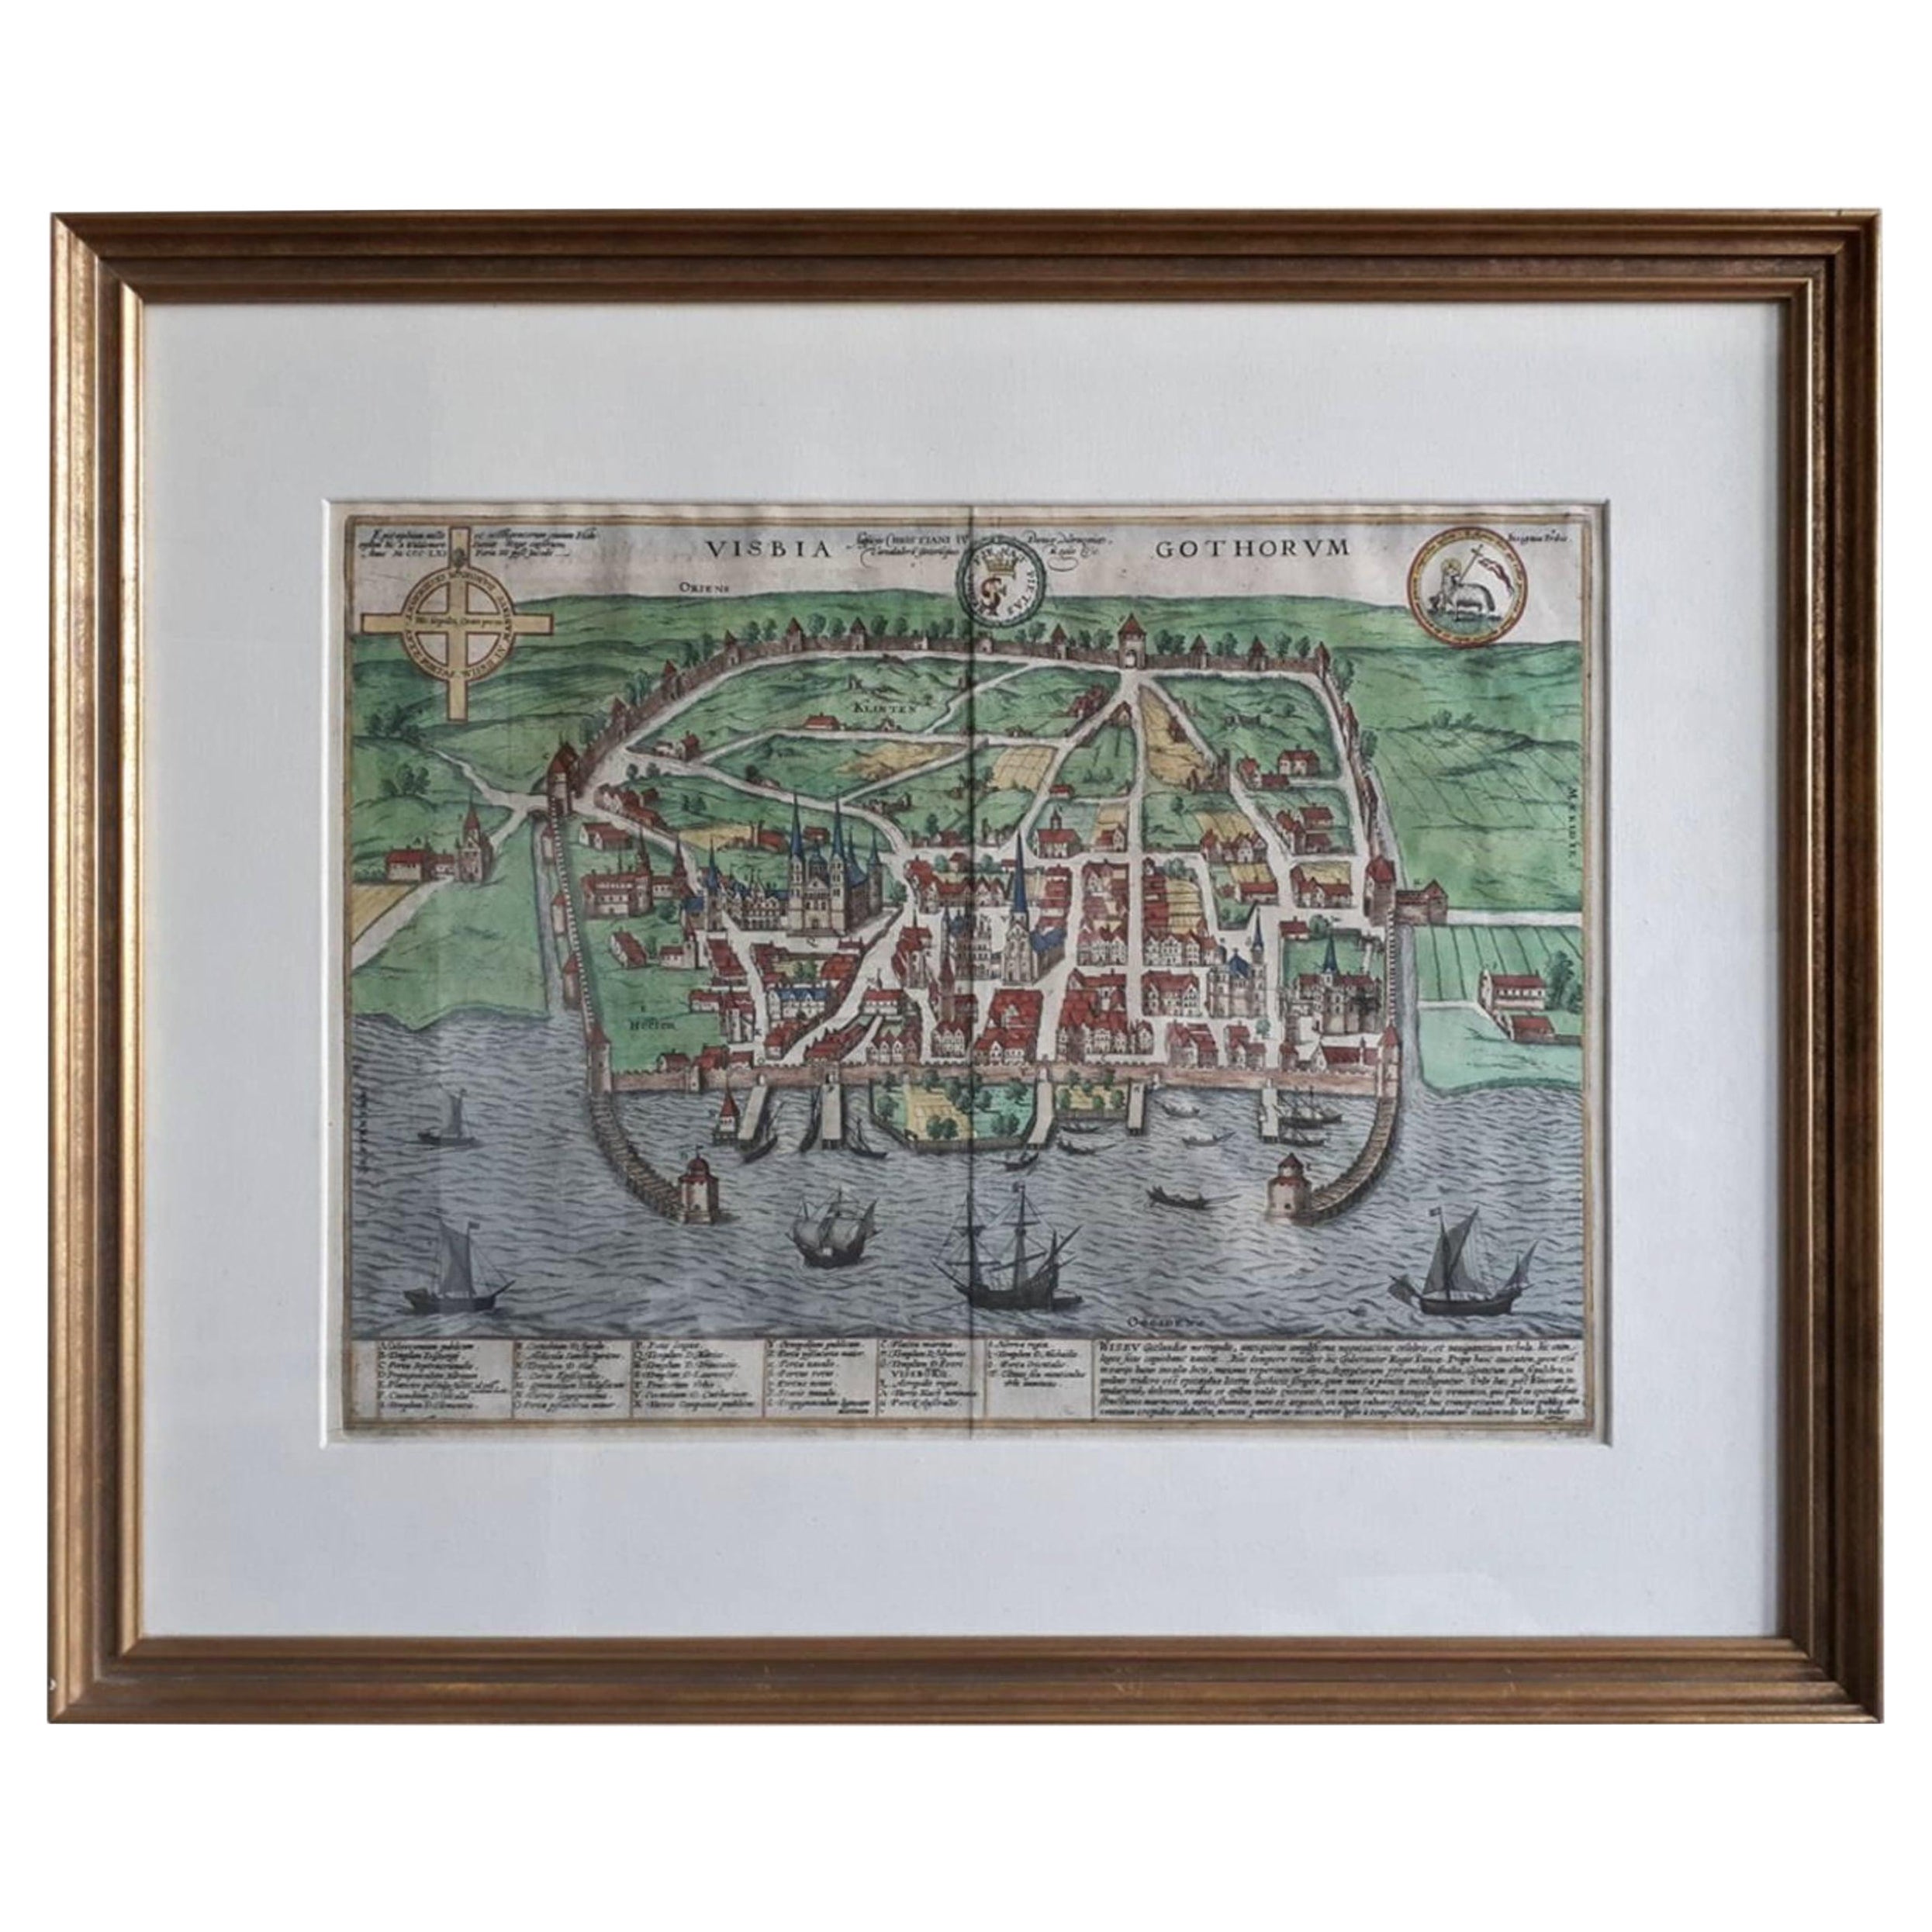 Sweden Details about   Old Historic Antique Map Visby 1598 by Braun & Hogenberg REPRINT 1500's 